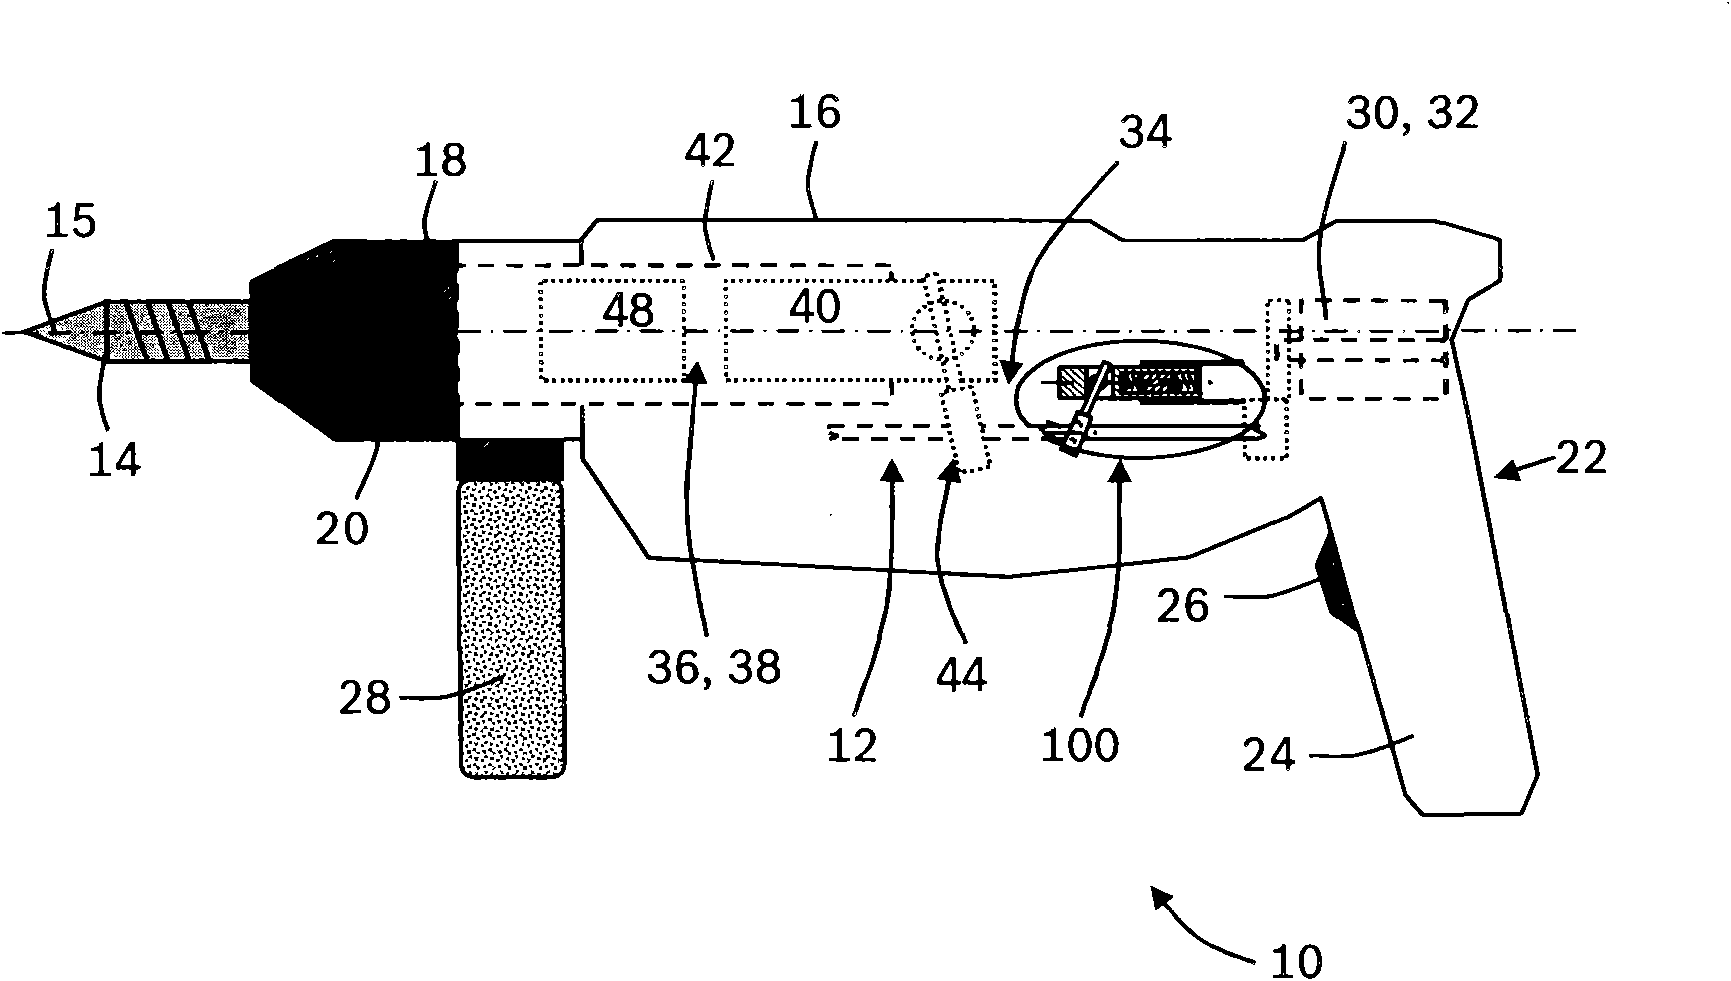 Vibration reduction and/or compensation device, particularly for handheld machine tool and application in handheld machine tool